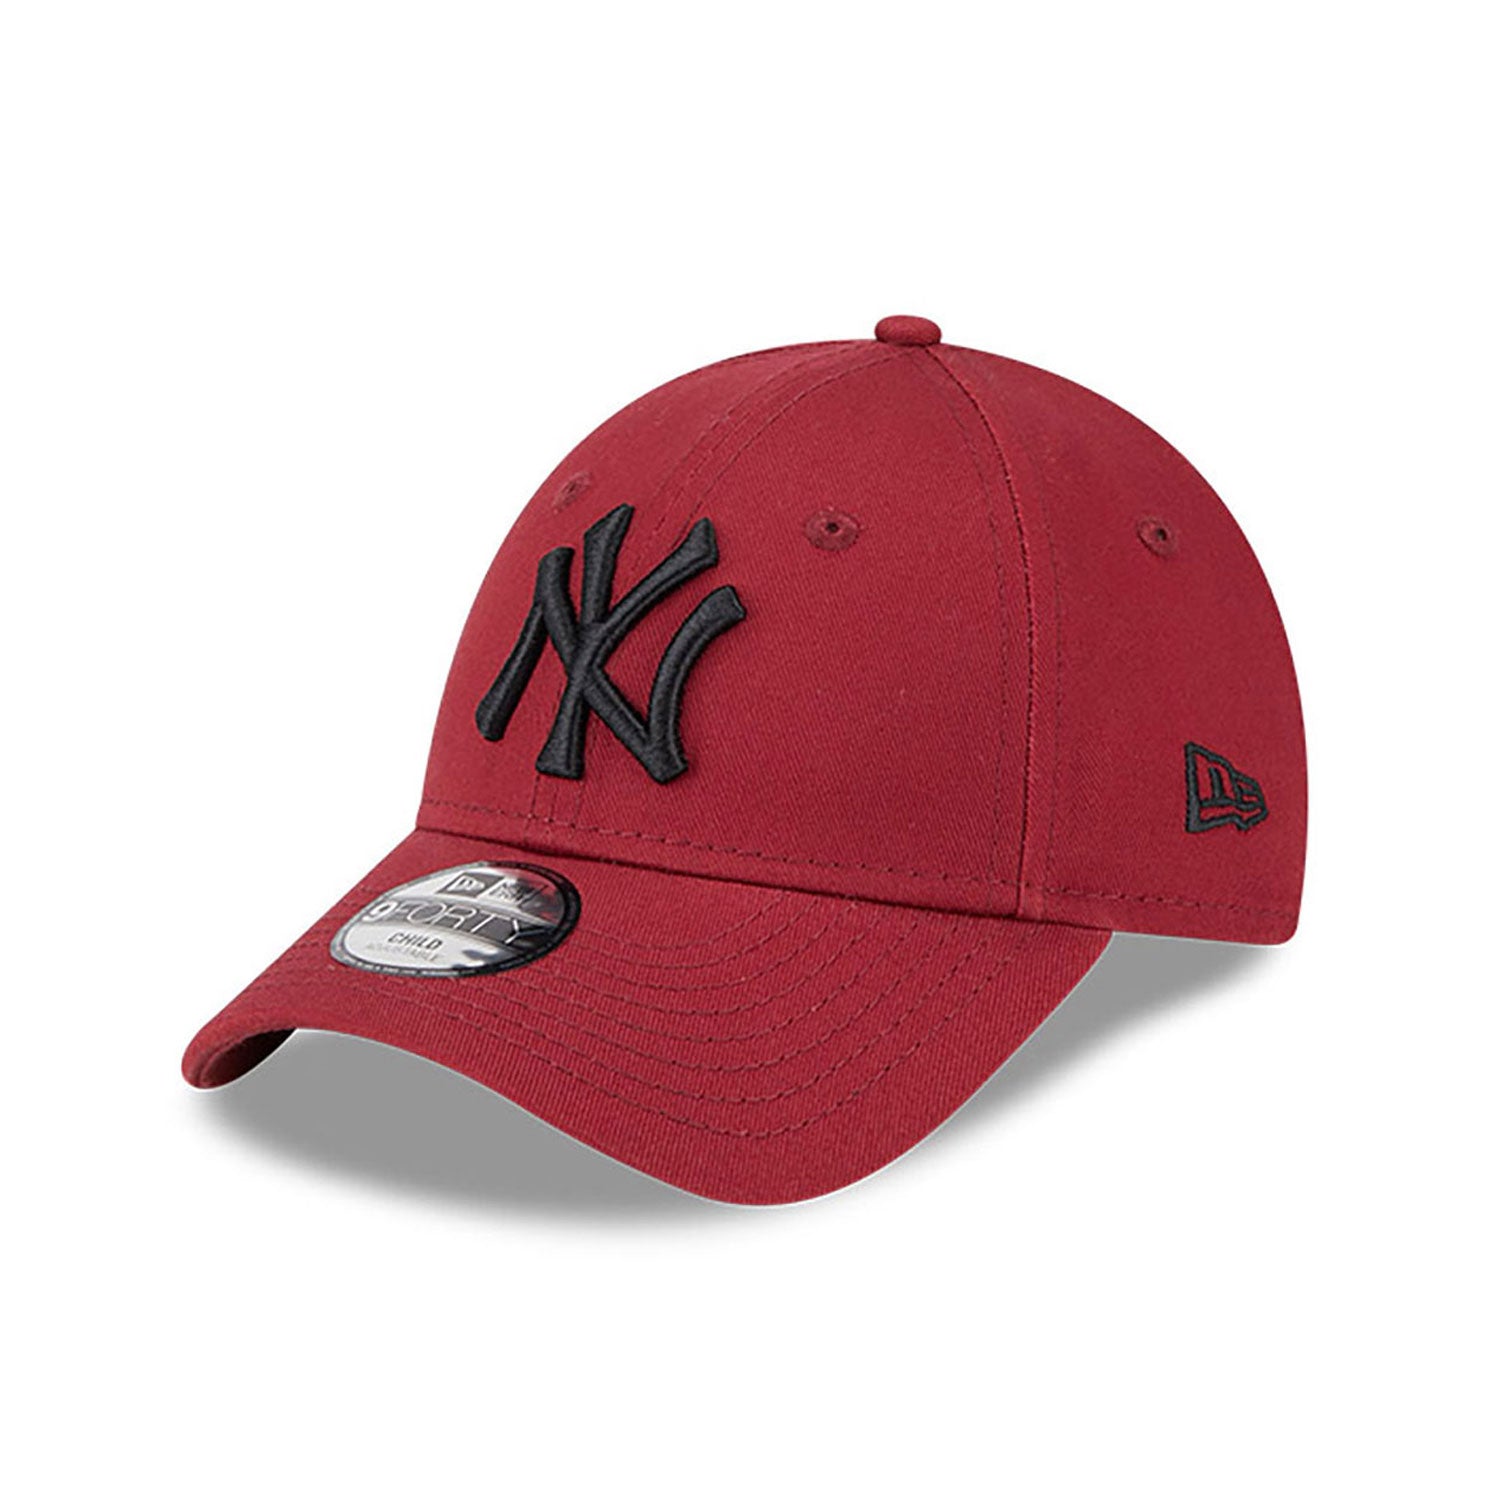 New era casquette NY Yankees enfant scratch Toddler 